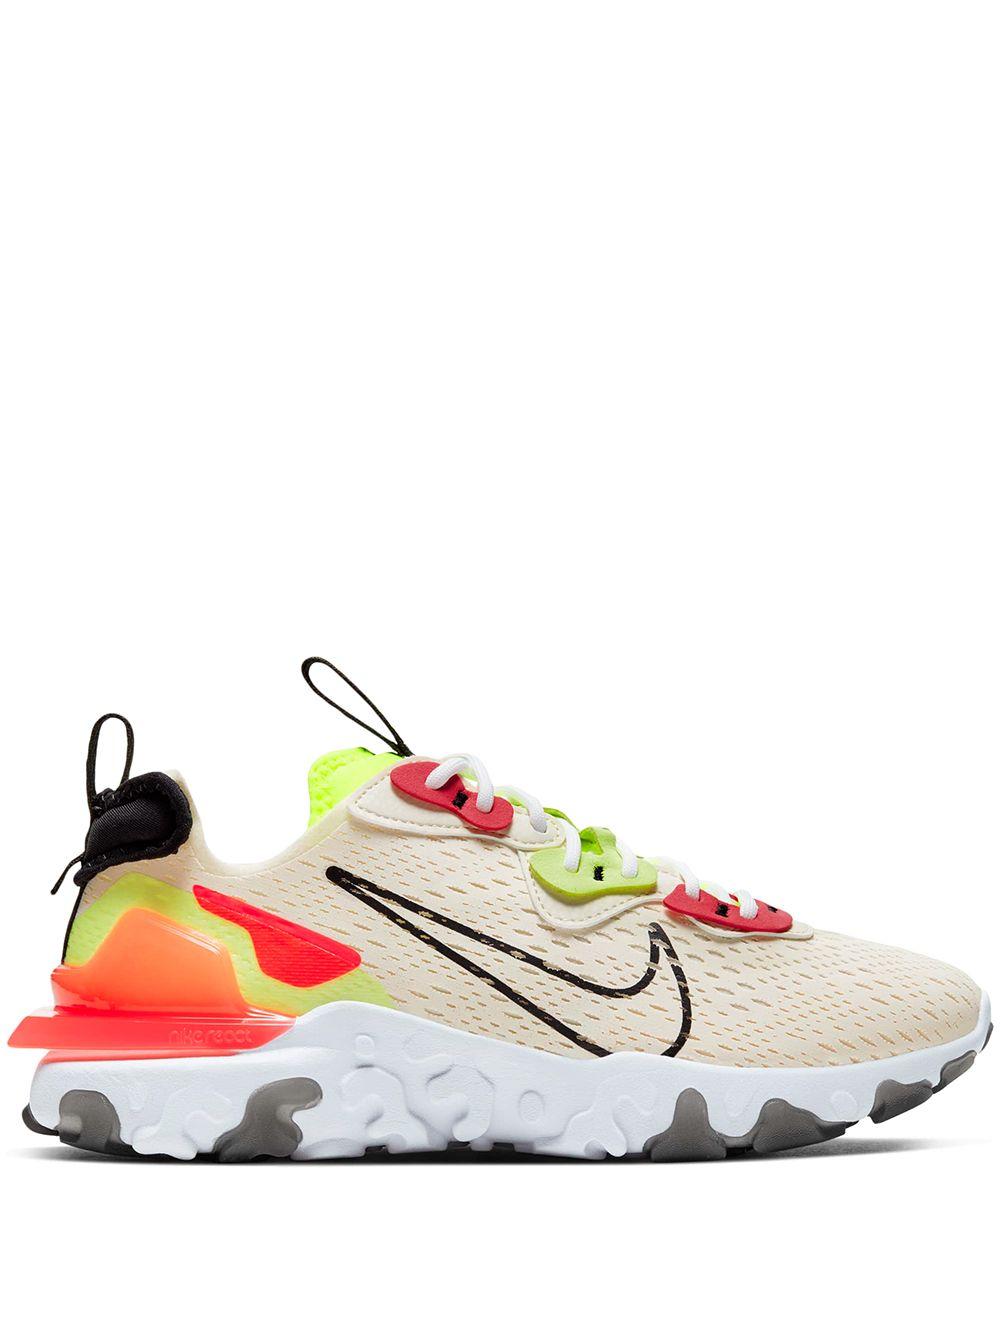 Nike React Vision Sneakers - Save 1% - Lyst